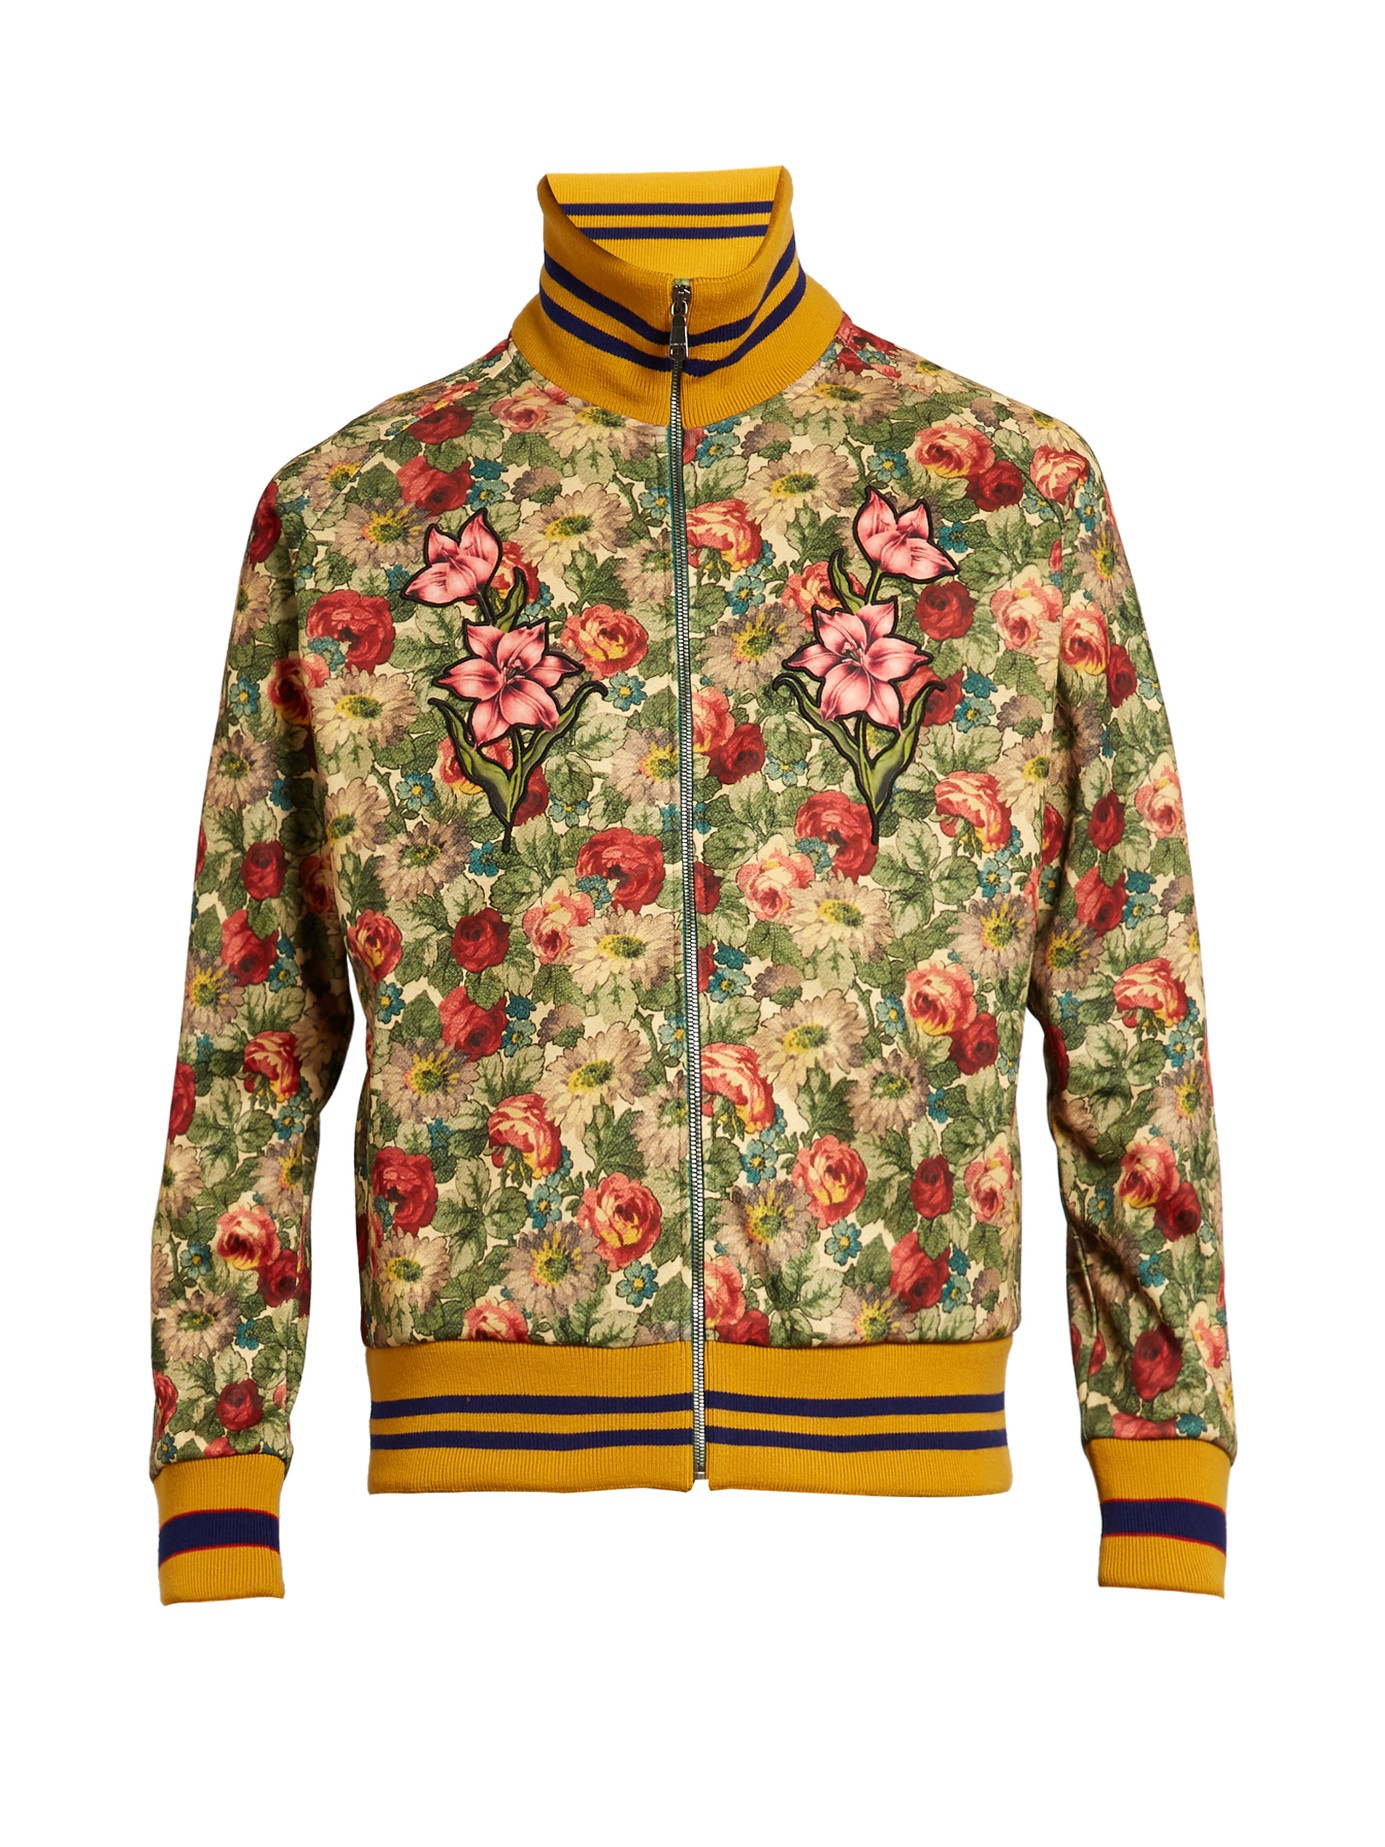 Gucci Synthetic Floral Print Zip Jacket 